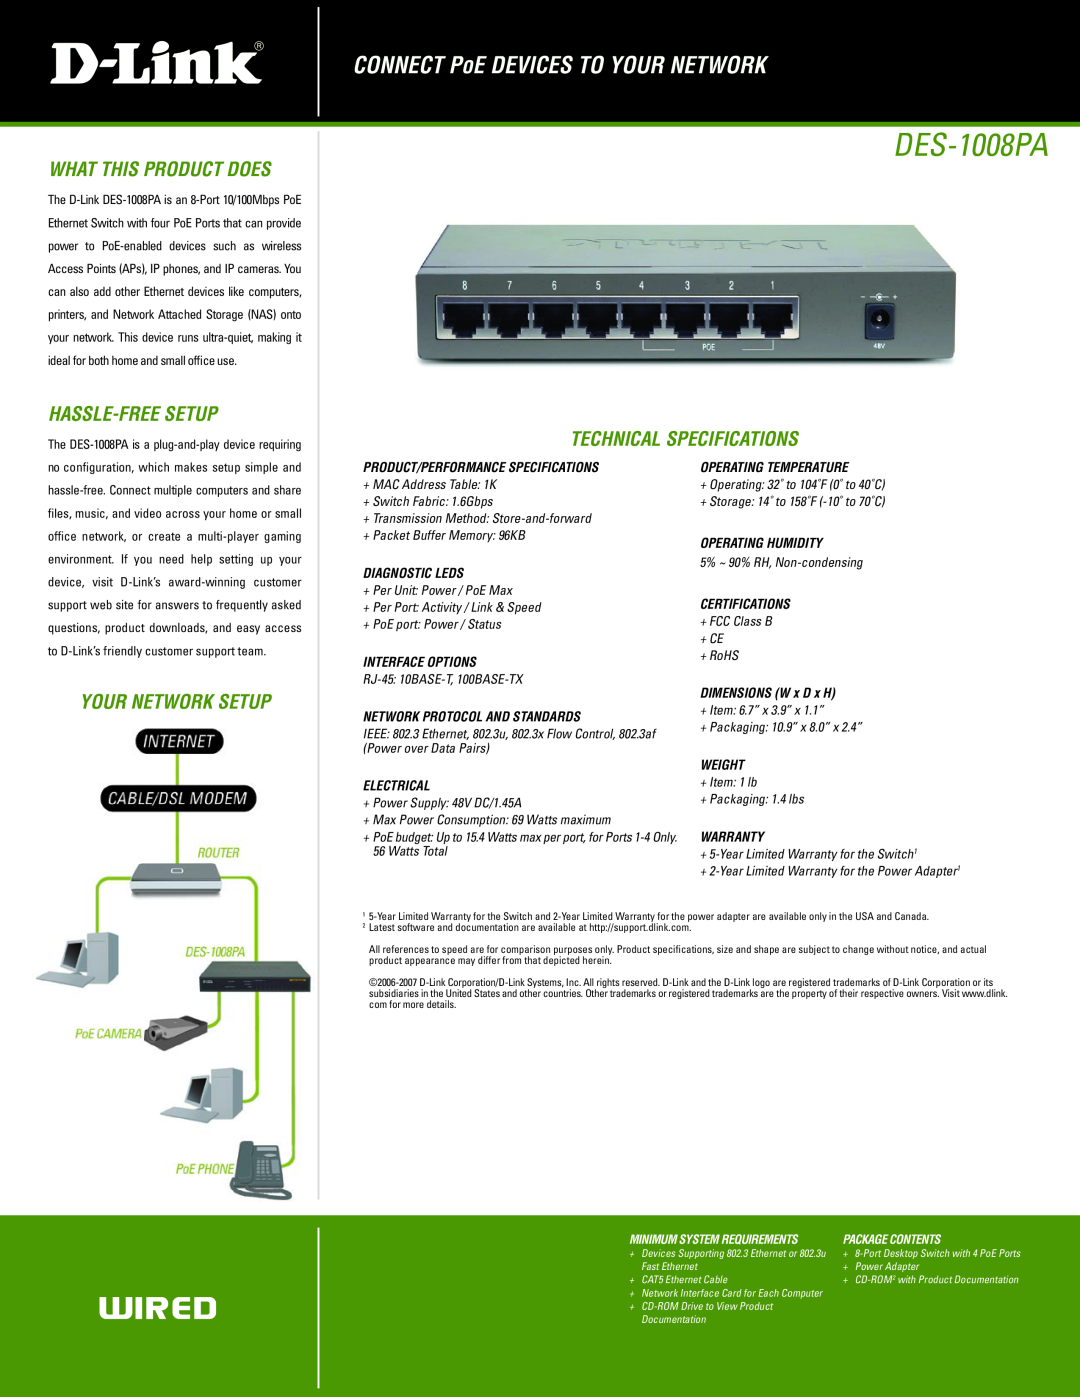 D-Link DES-1008PA manual What This Product Does, Hassle-Free Setup, Technical Specifications, Your Network Setup 